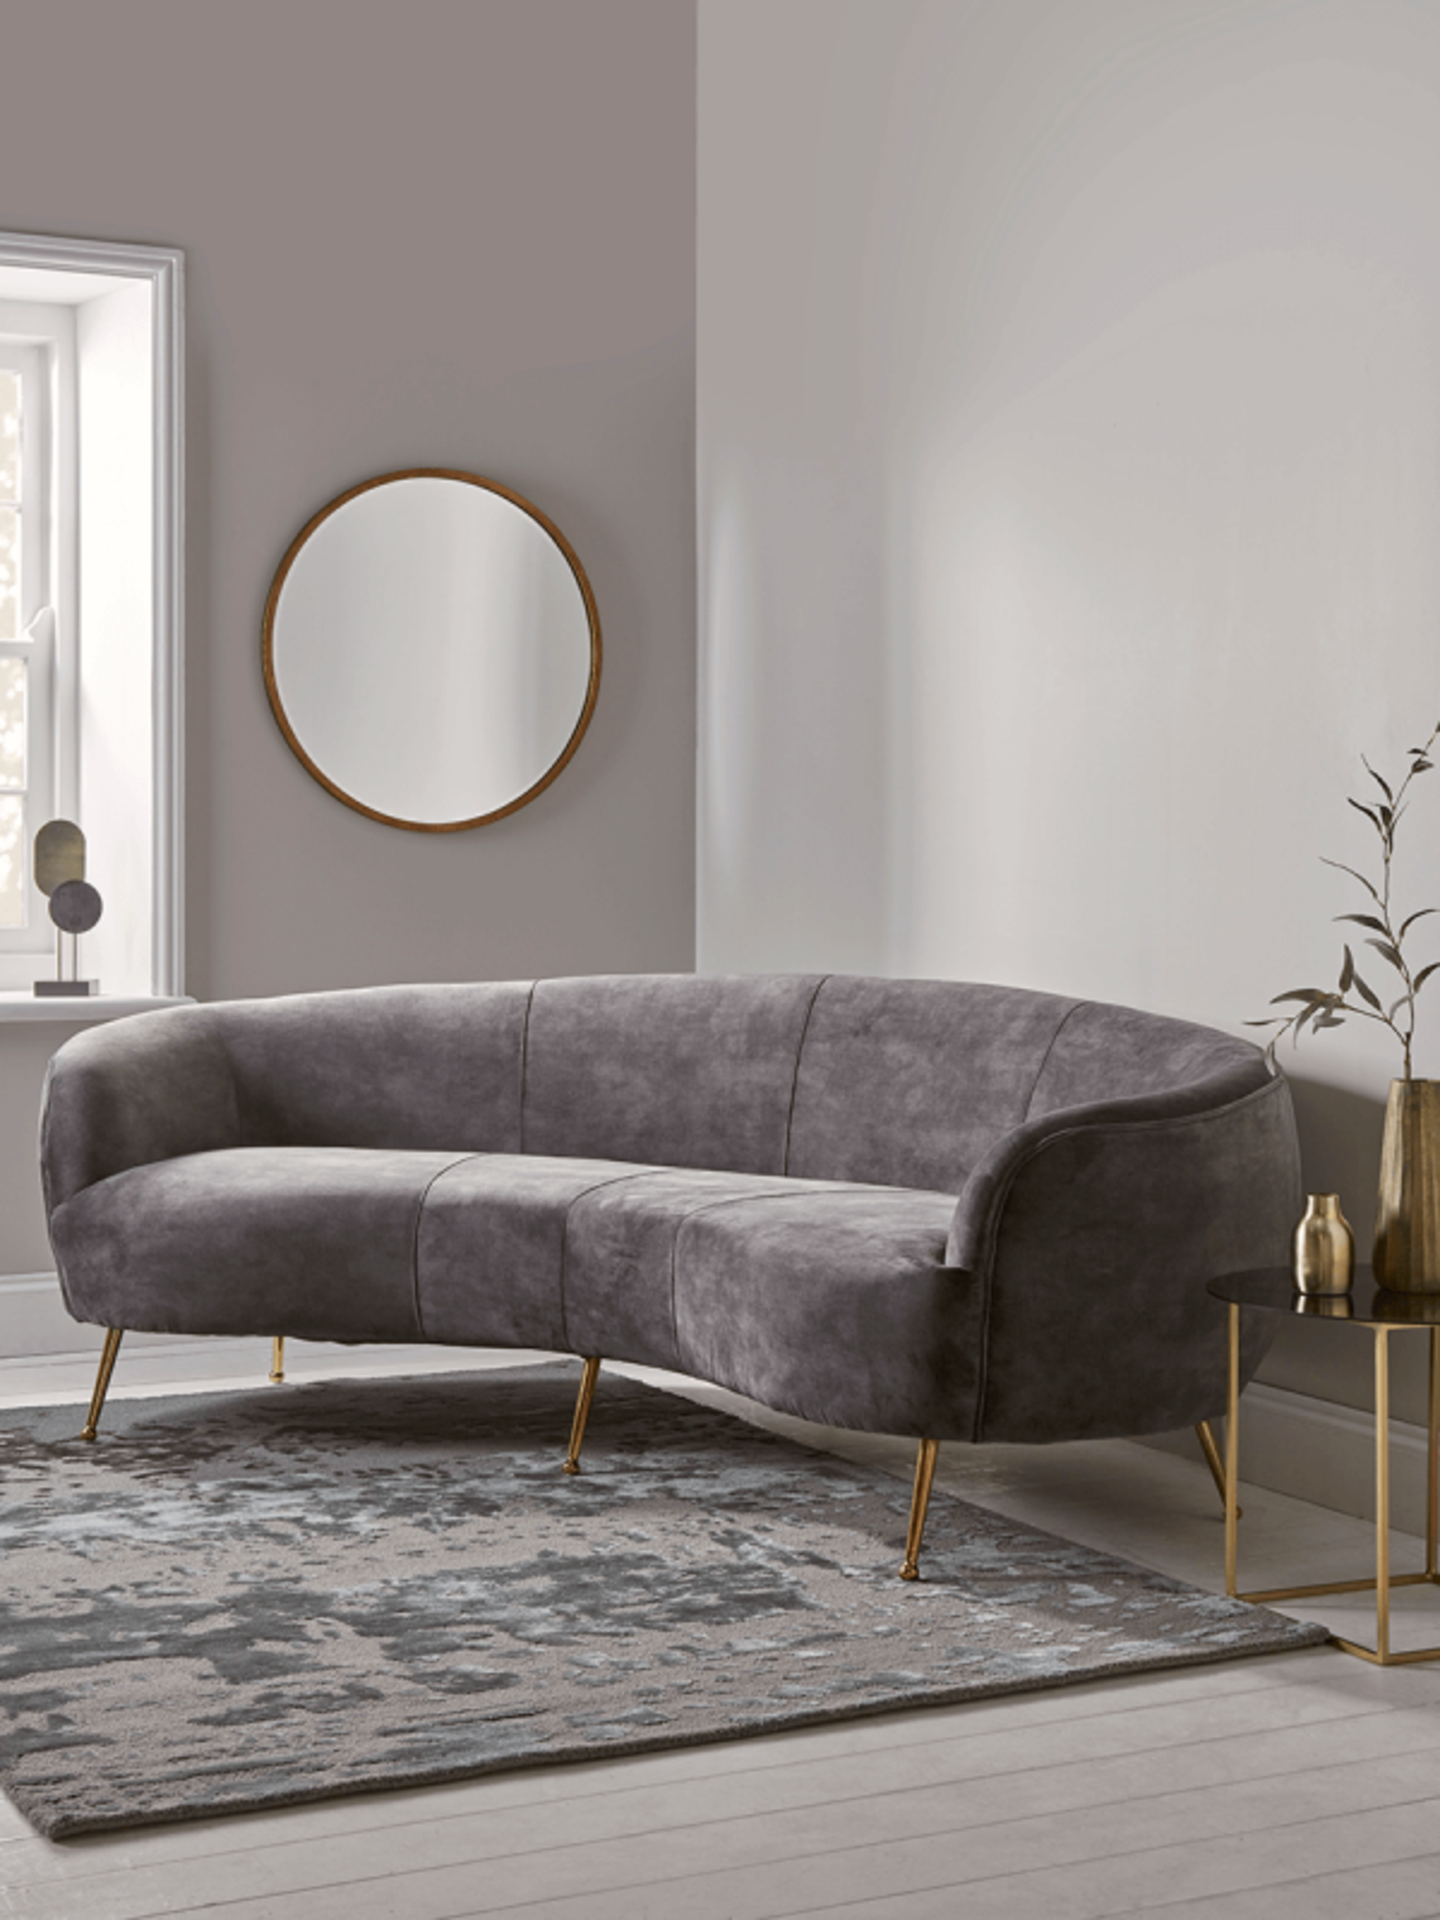 Cox & Cox Deep Grey Velvet Curved Sofa RRP ?2495.00 - This product has been graded in BC